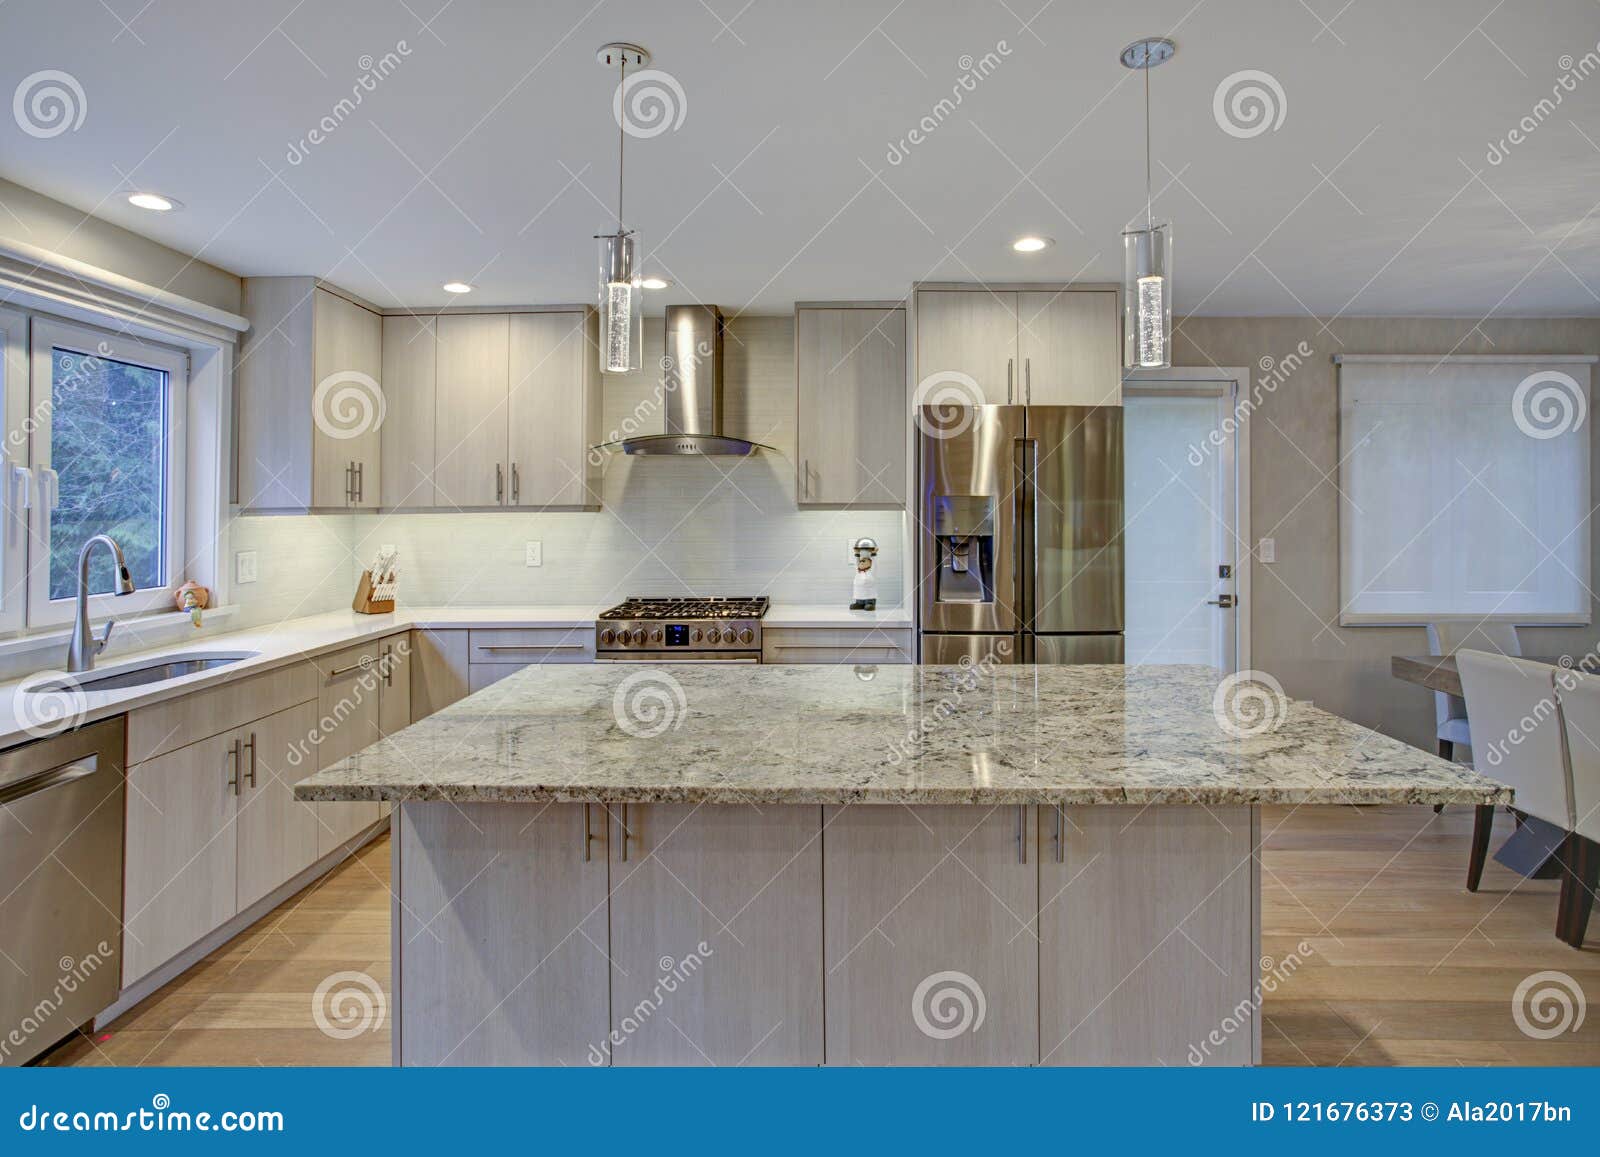 Lovely Kitchen Room With Kitchen Island Stock Image Image Of